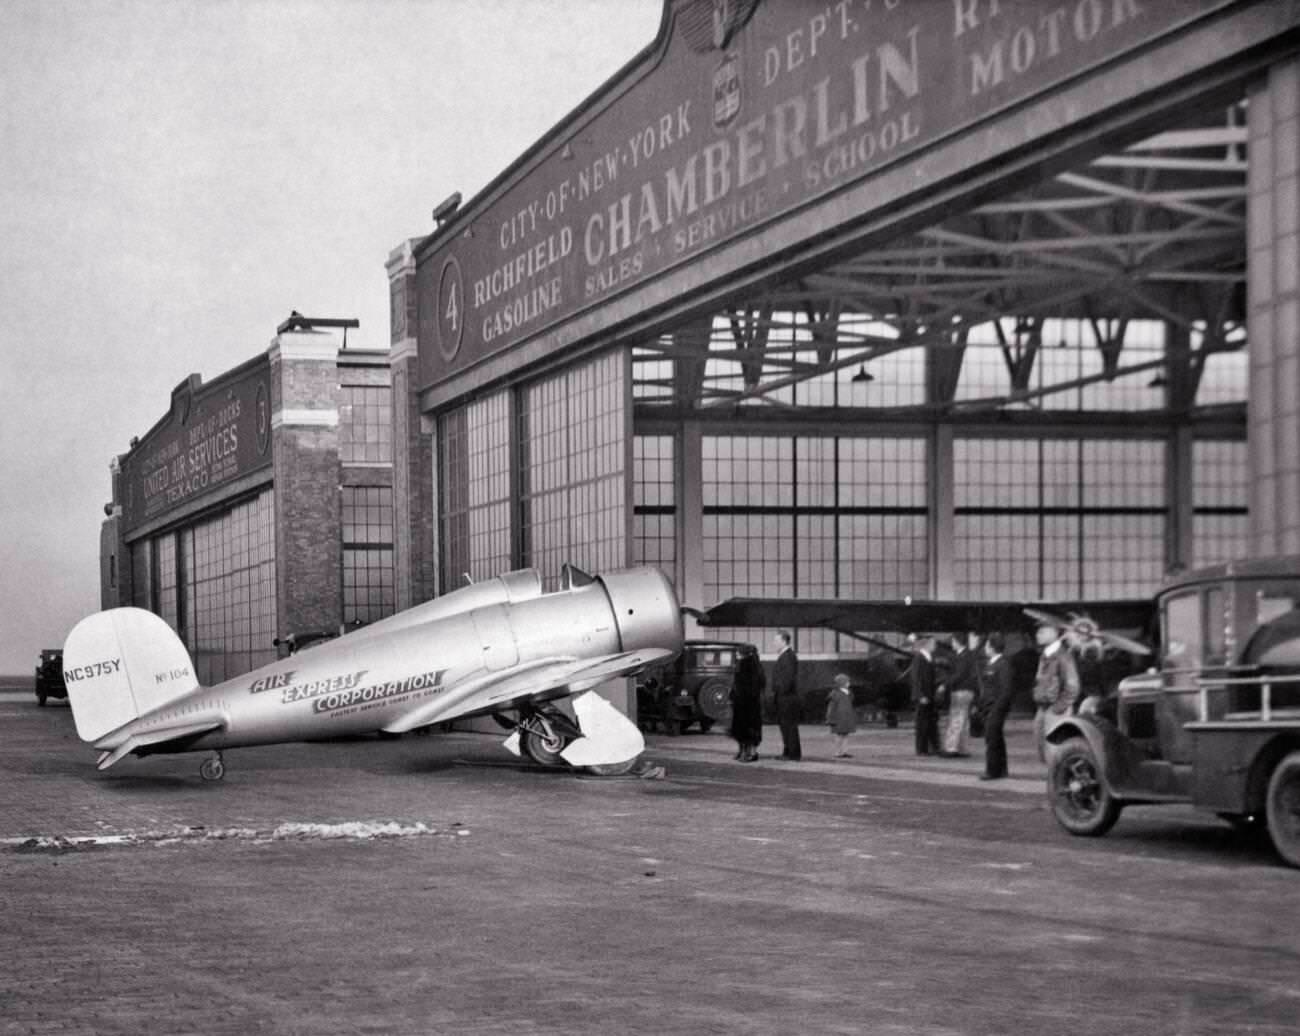 First Air Express Service From Los Angeles To New York At Floyd Bennett Field, Brooklyn, 1930S